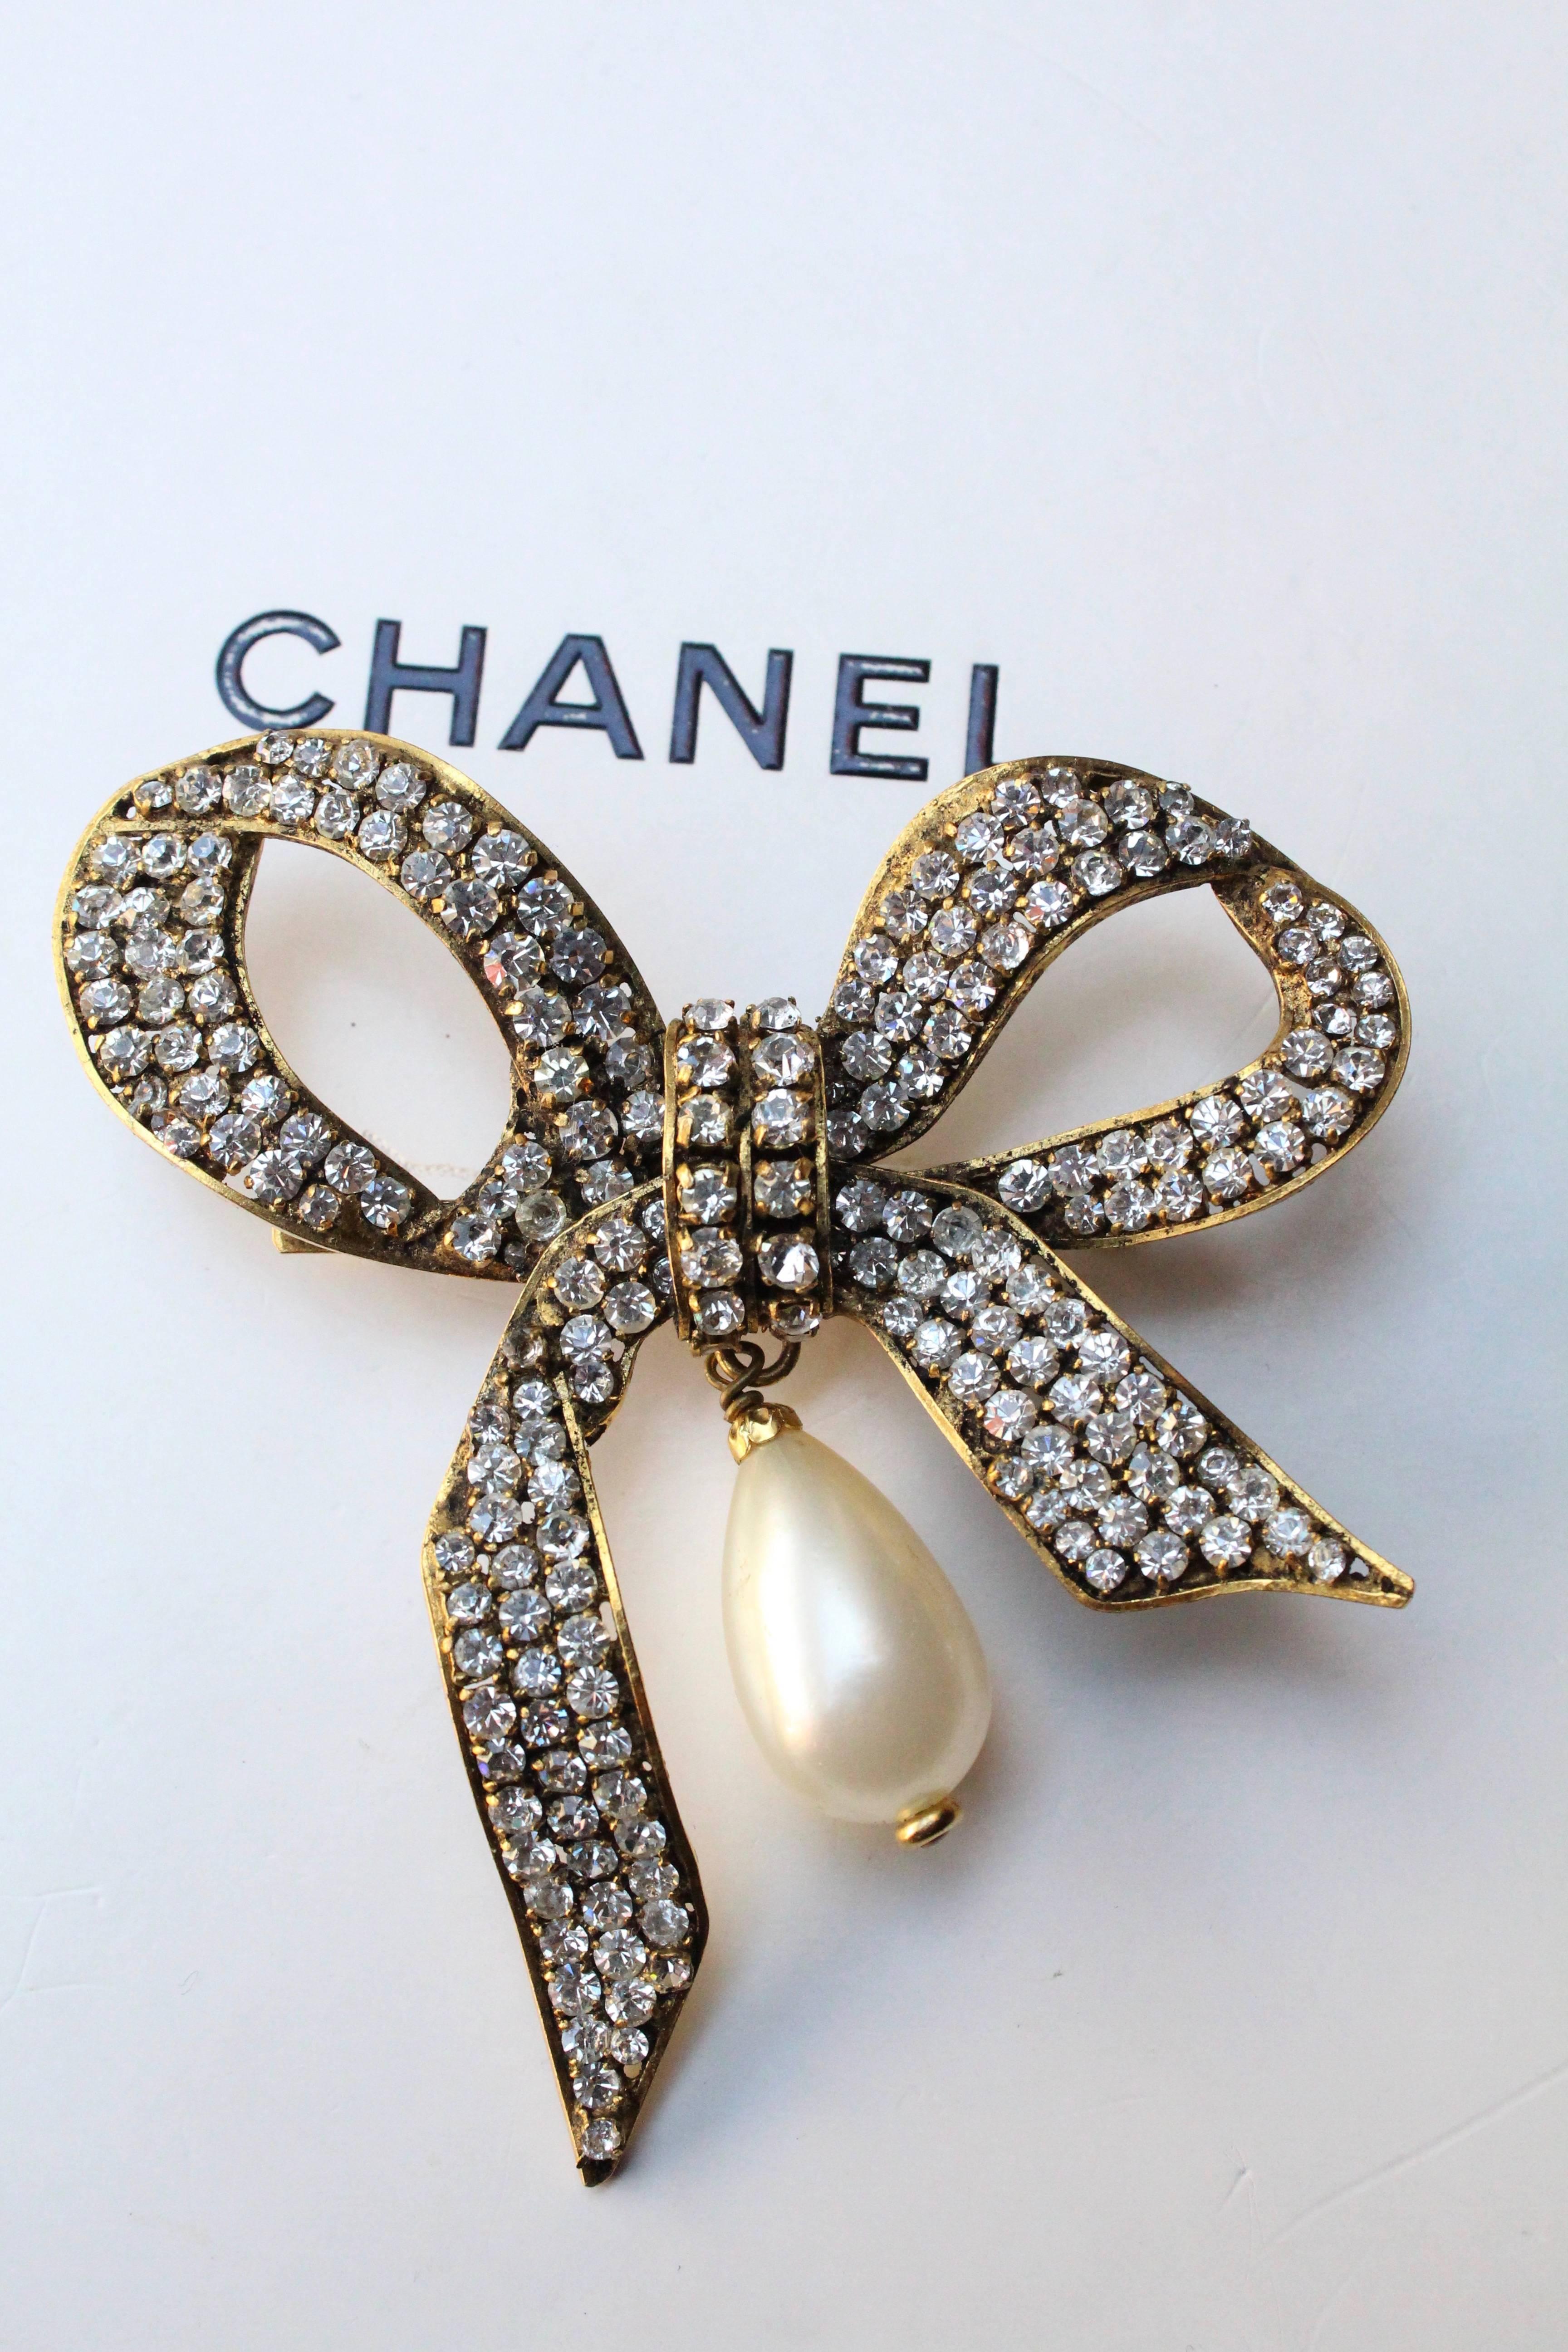 CHANEL (Made in France) Lovely large evening brooch in the shape of a bow, composed of a gilded metal setting entirely paved with white rhinestones. The brooch is further embellished with a pearly glass tear drop.

Signed on a back plate.

Circa